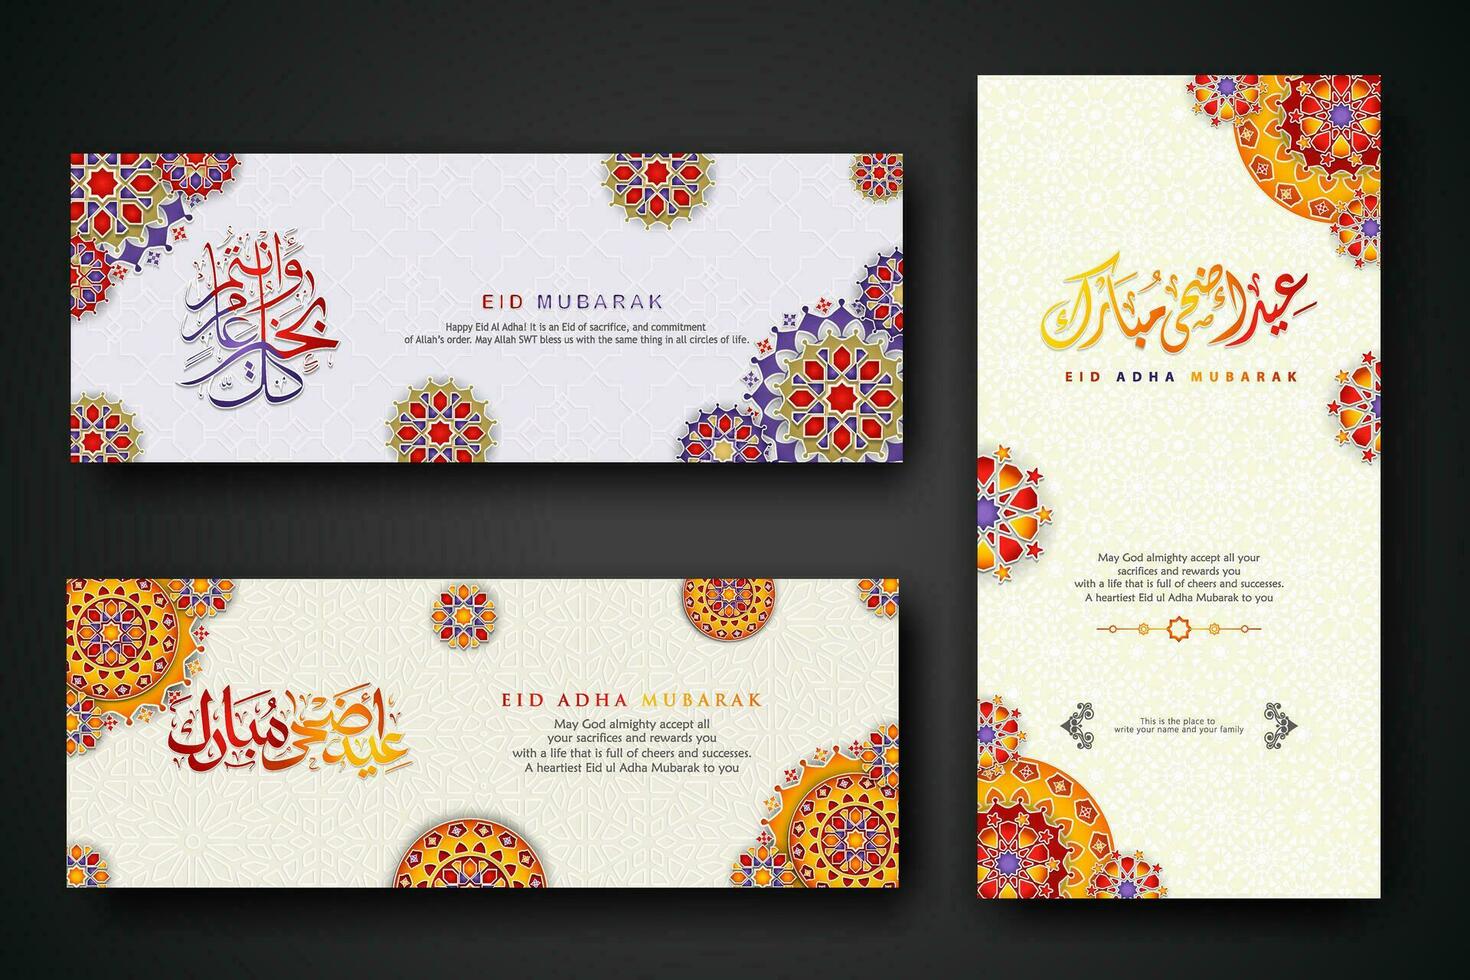 Eid al adha concept banner with arabic calligraphy and 3d paper flowers on Islamic geometric pattern background. Vector illustration.